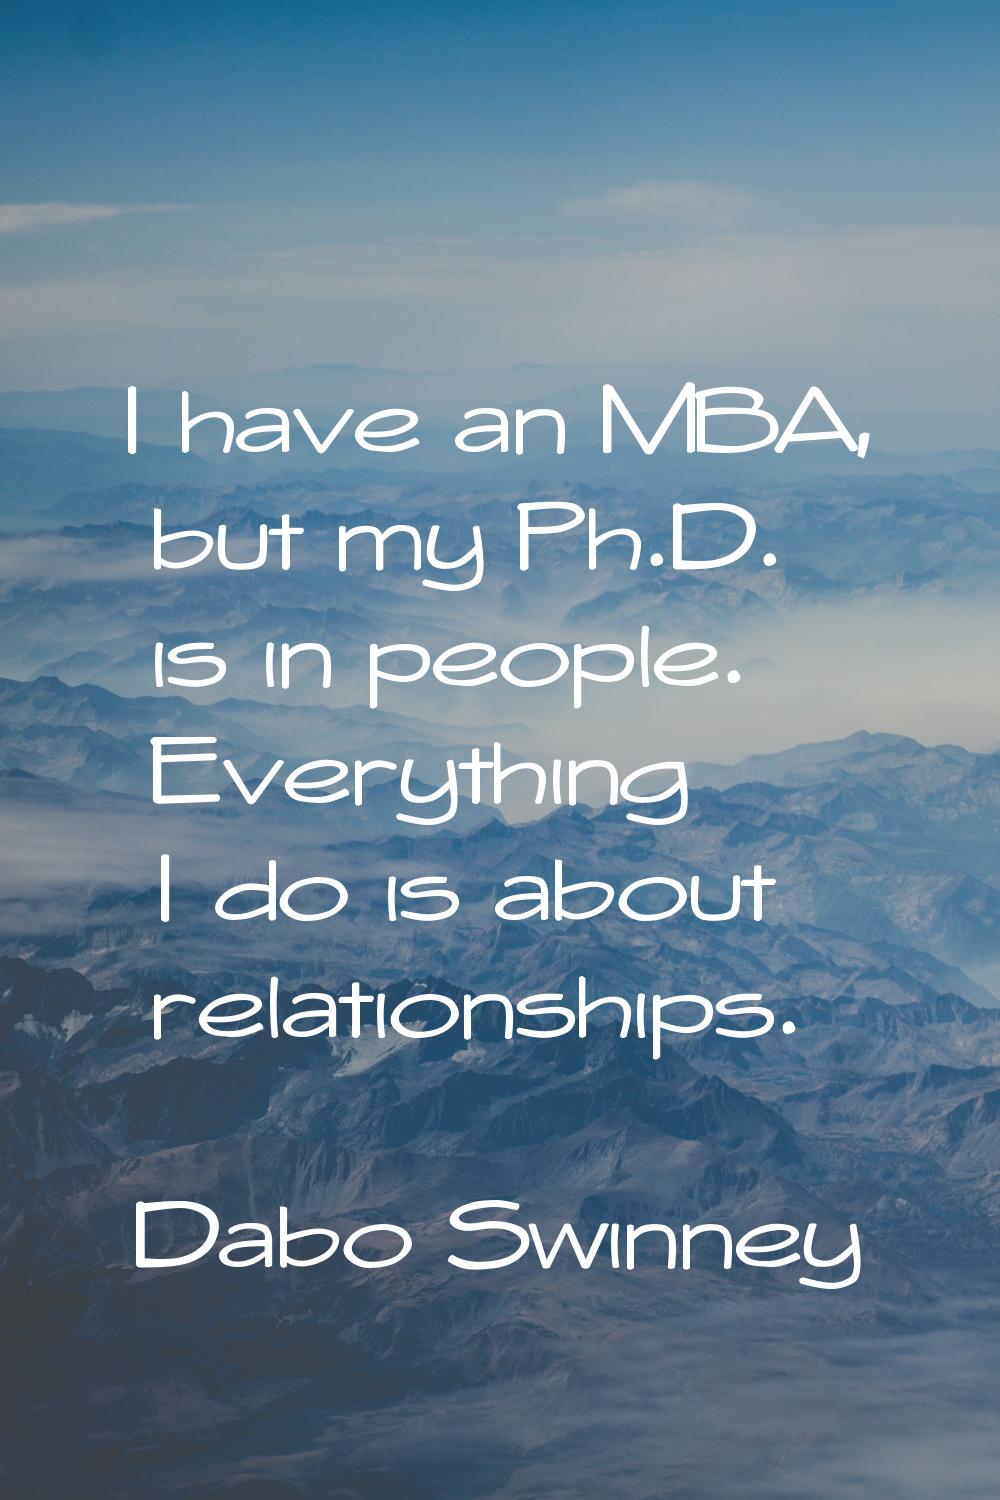 I have an MBA, but my Ph.D. is in people. Everything I do is about relationships.